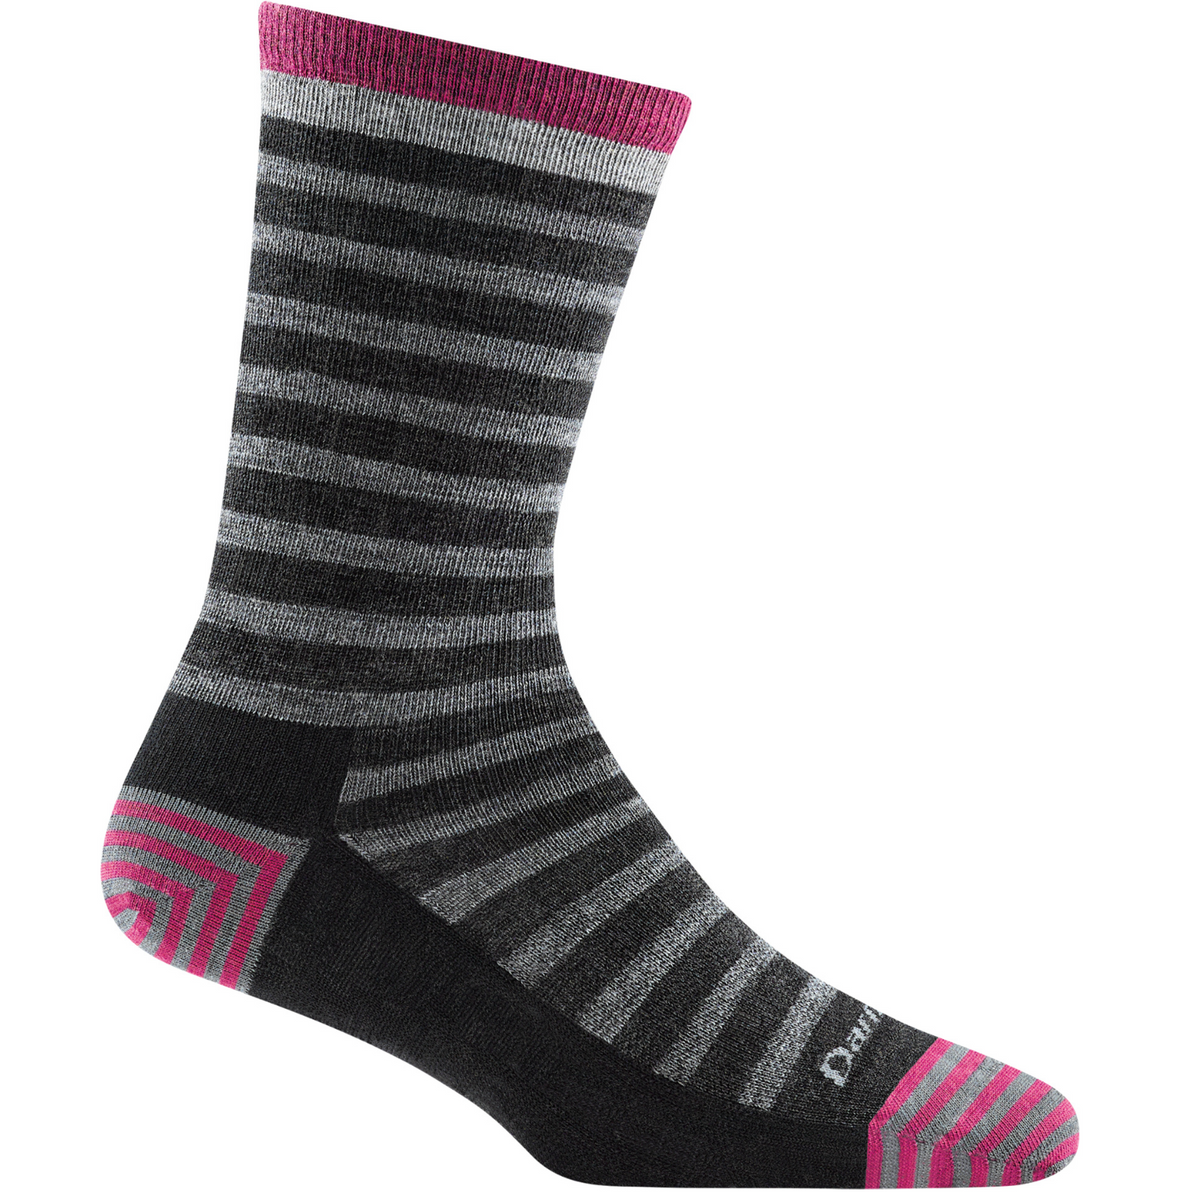 Darn Tough 6039 Morgan Lightweight Lifestyle Crew women&#39;s sock in charcoal featuring gray and charcoal stripes on display